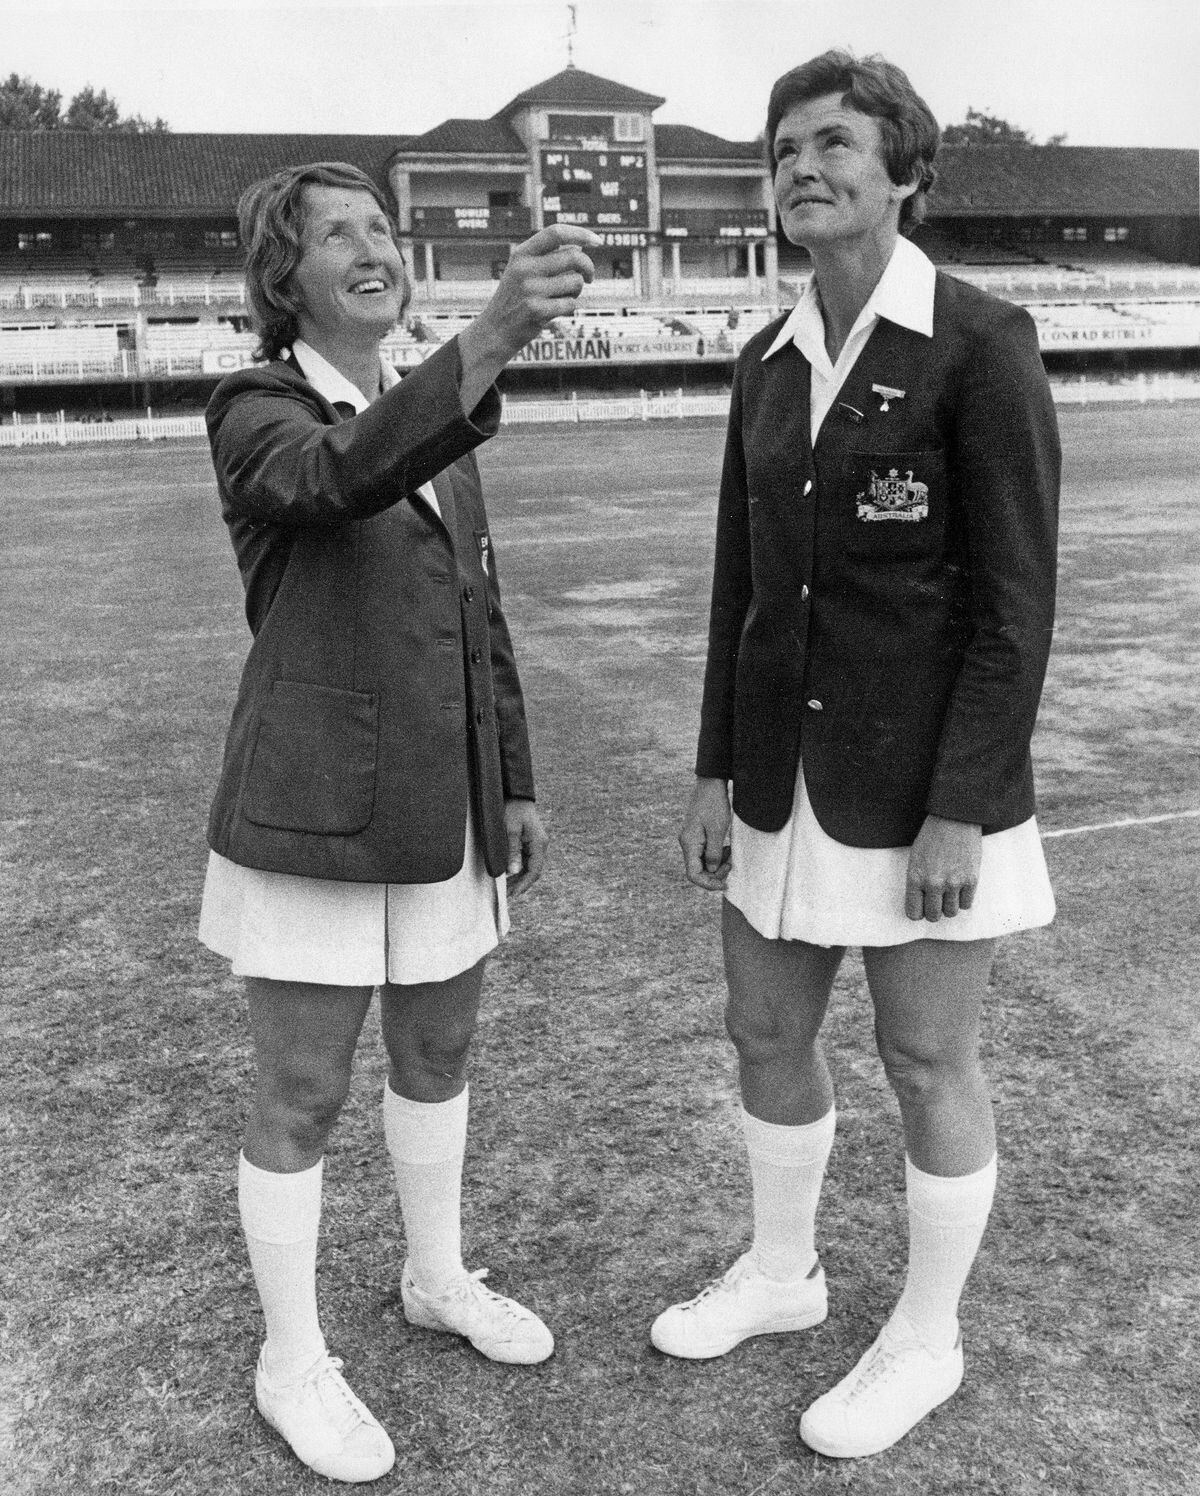 August 4 1976 – Cricket history was made today at Lord's when for the first time women were allowed to play a match there